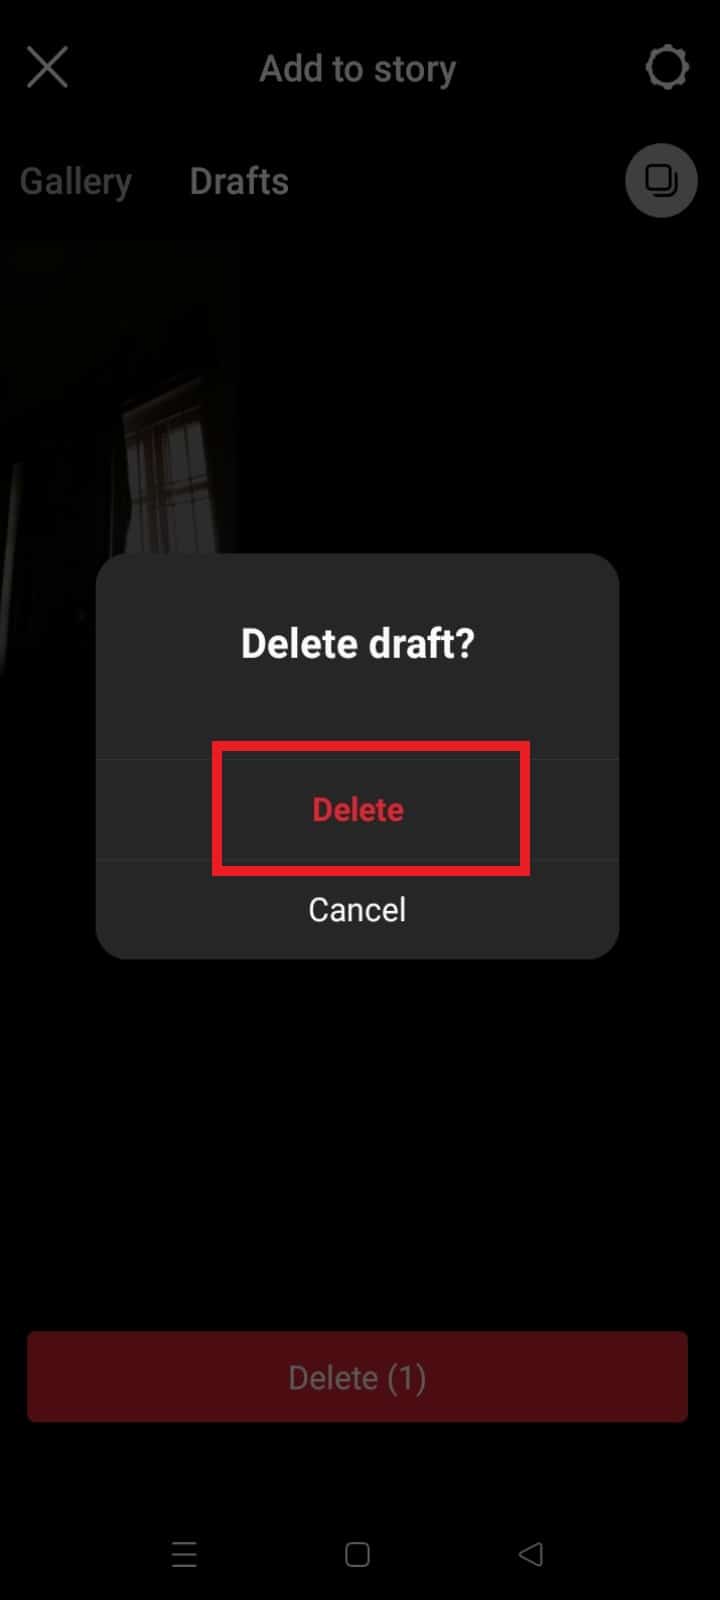 You will be asked for confirmation. Again, select Delete. | How to See and Delete IG Story Drafts